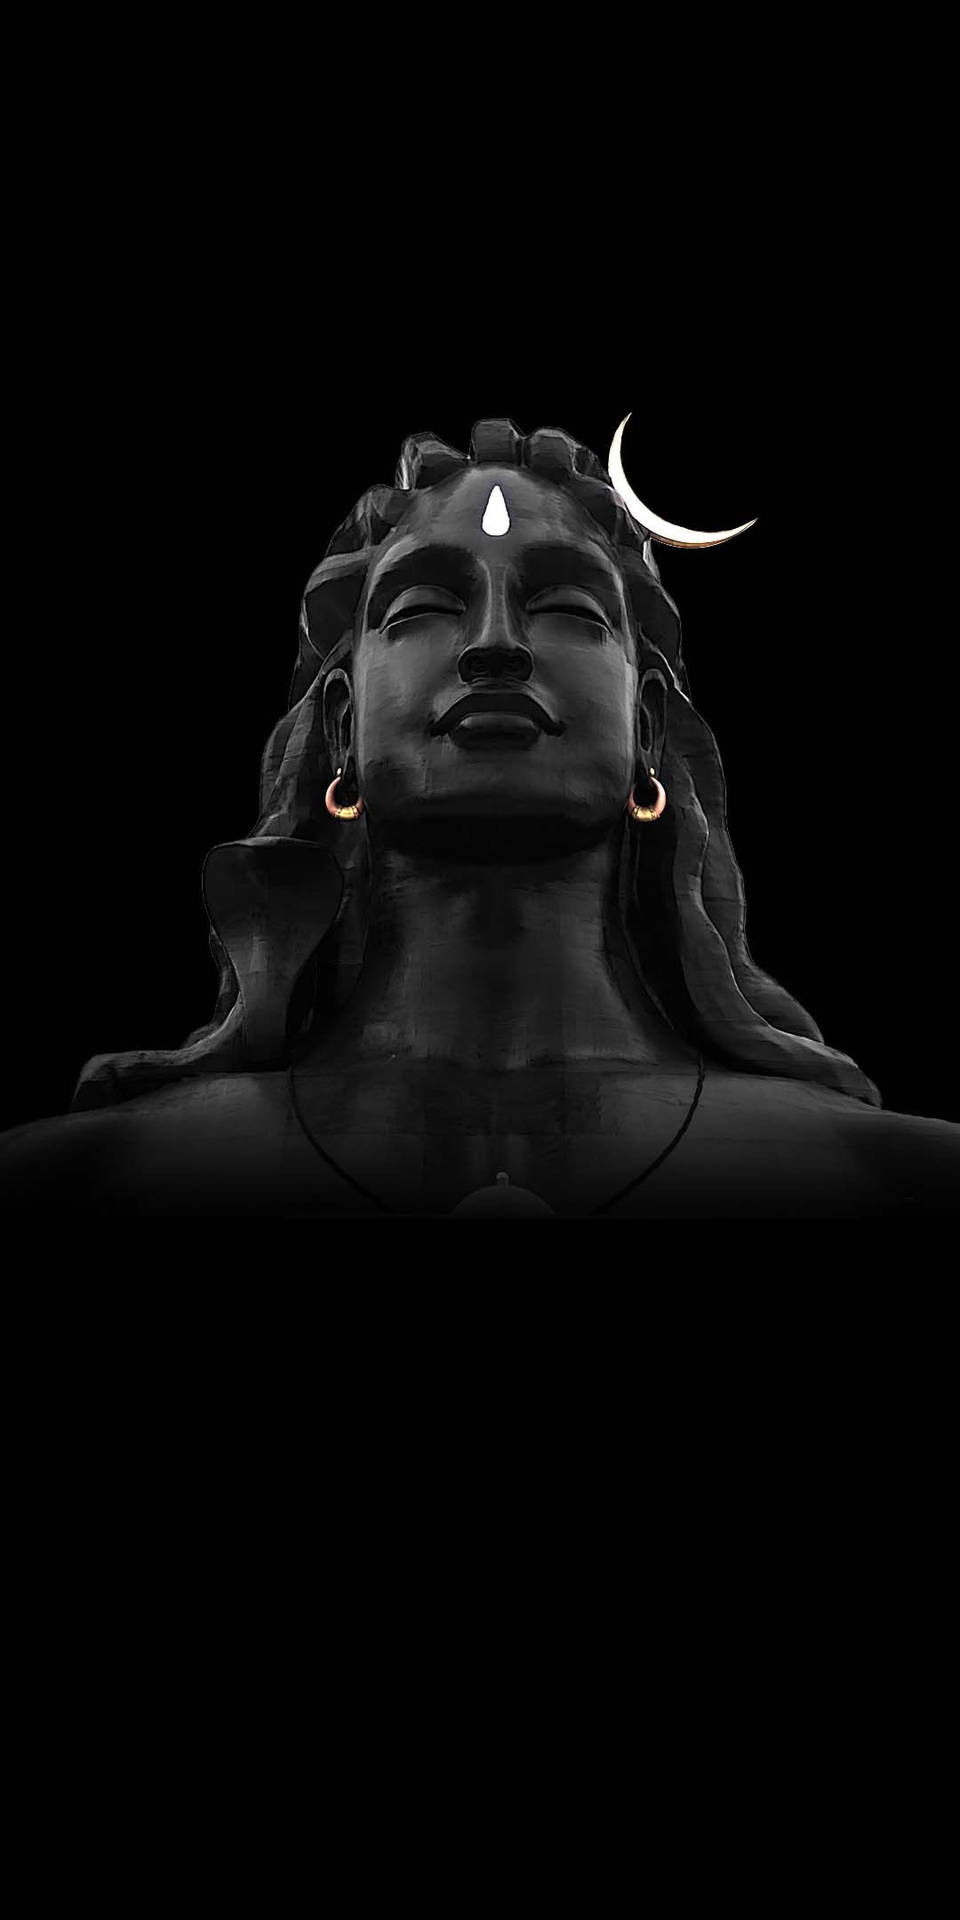 Free Shiva Iphone Wallpaper Downloads, [100+] Shiva Iphone Wallpapers for  FREE 